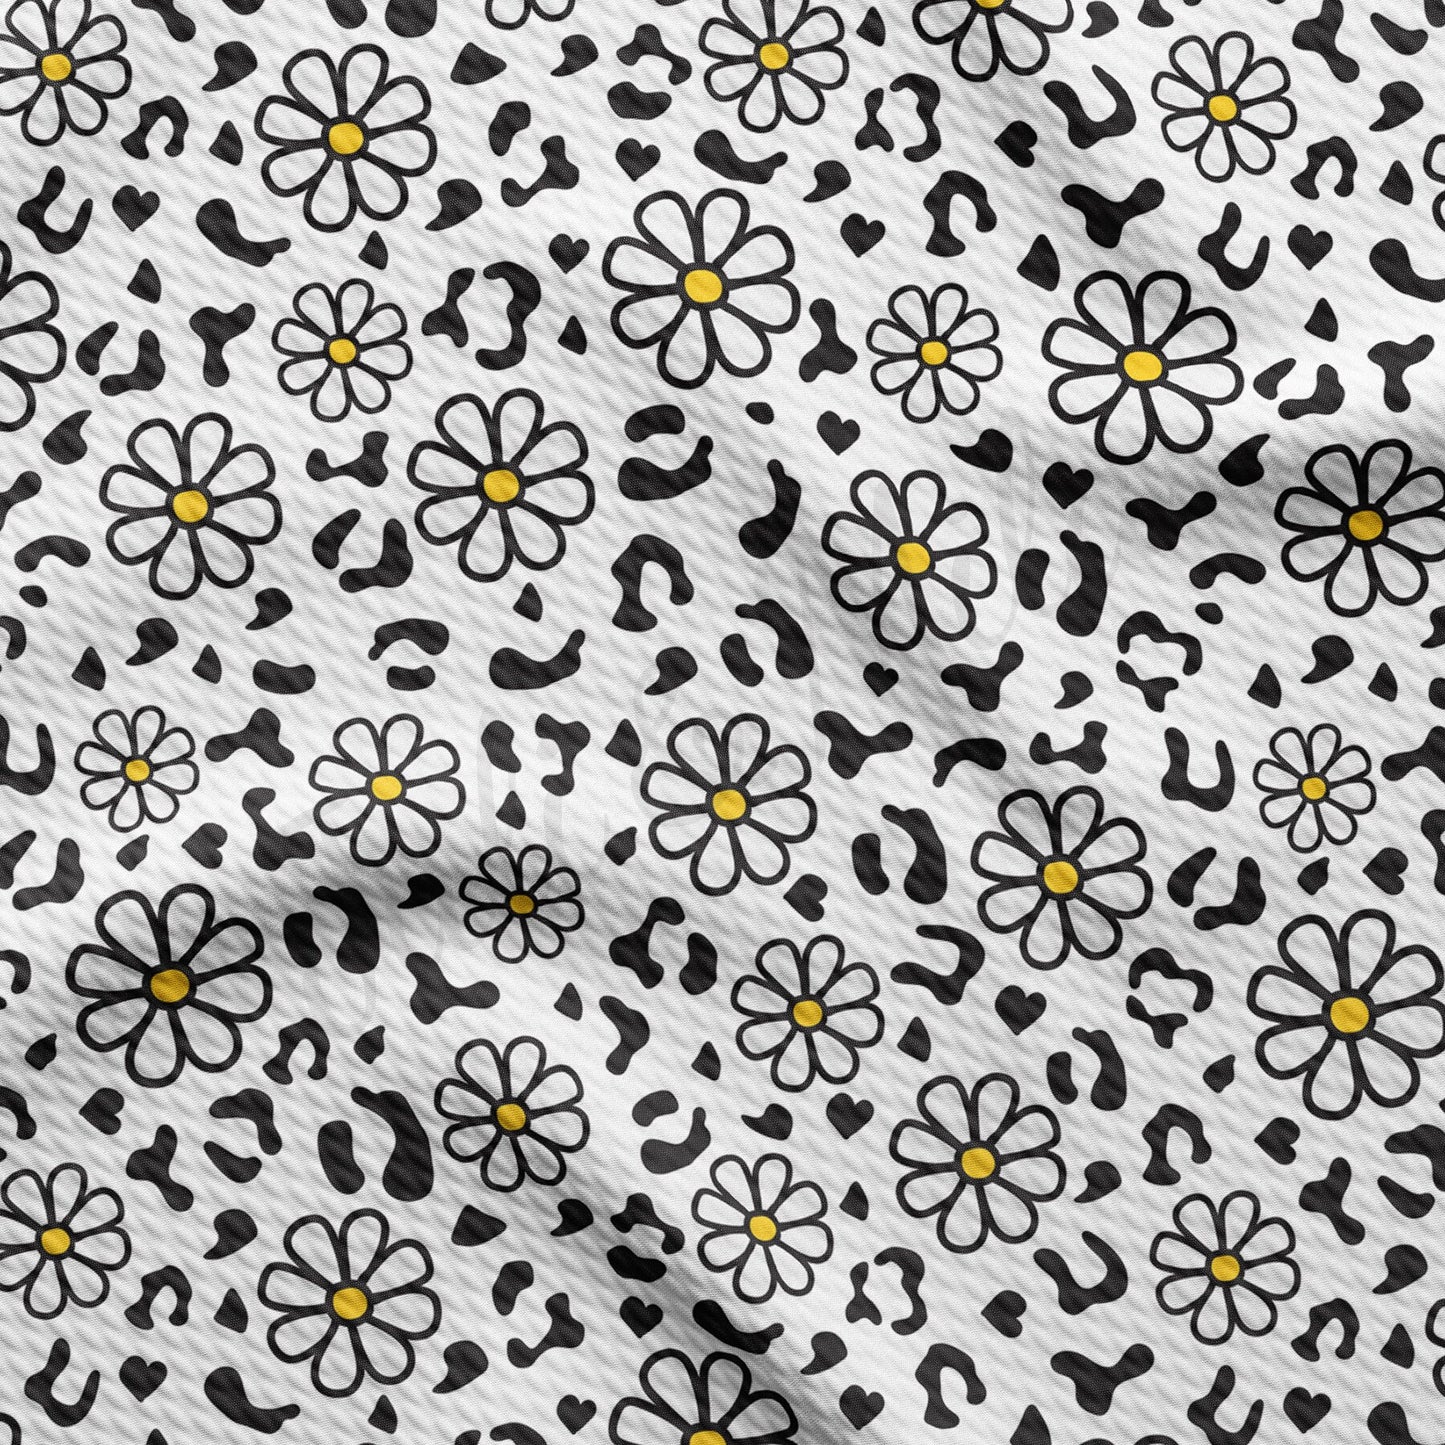 Floral  Bullet Textured Fabric by the yard AA1572